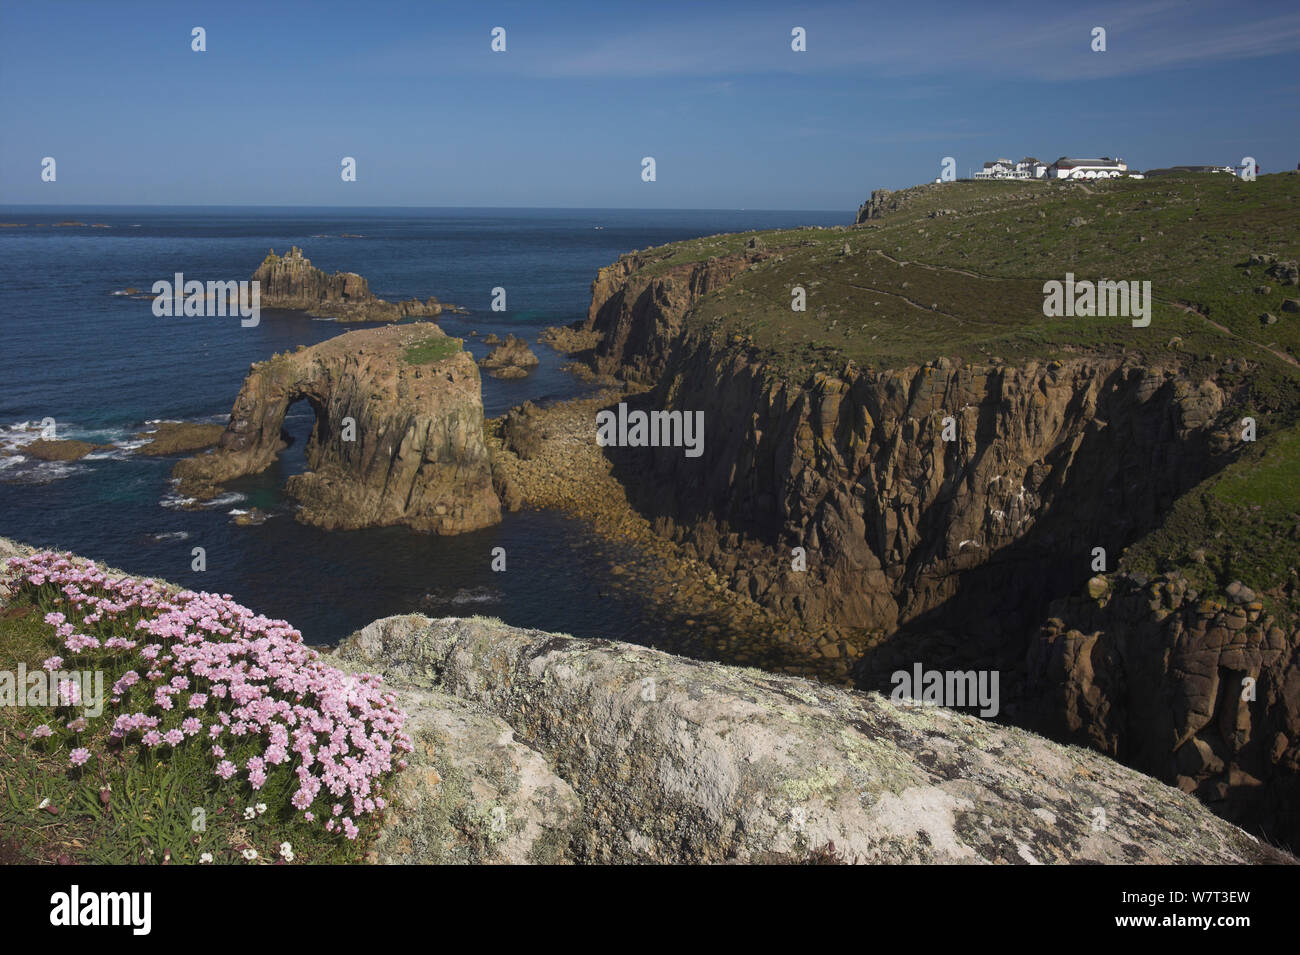 Cliffs with Sea thrift (Armeria maritima) at Lands End, Cornwall, England, UK, May 2012. Stock Photo